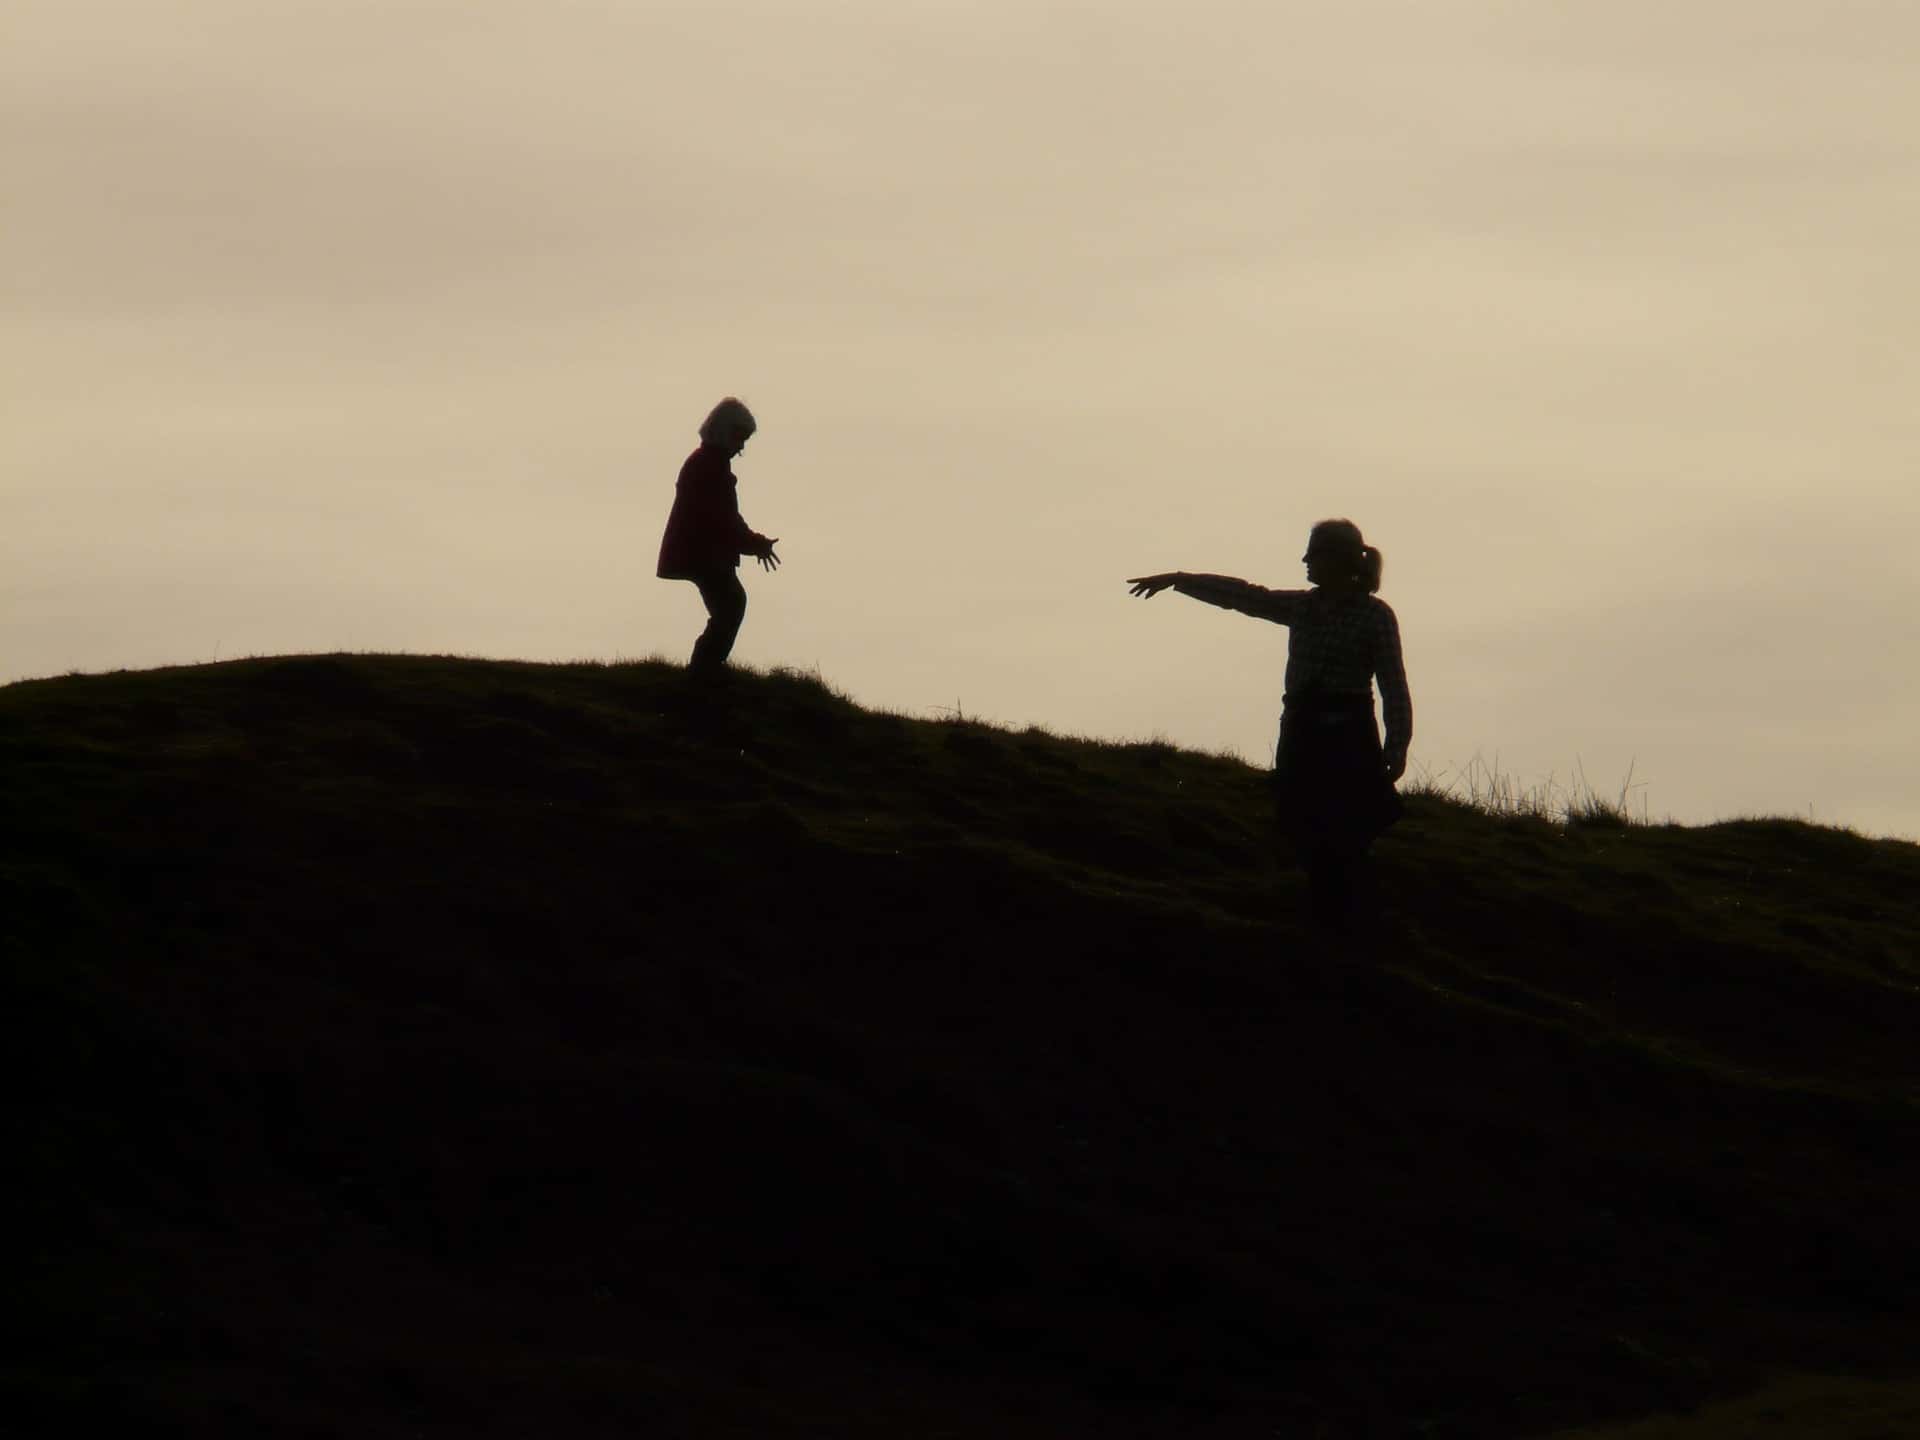 A mother and child silhouetted on a hillside symbolize the human environment